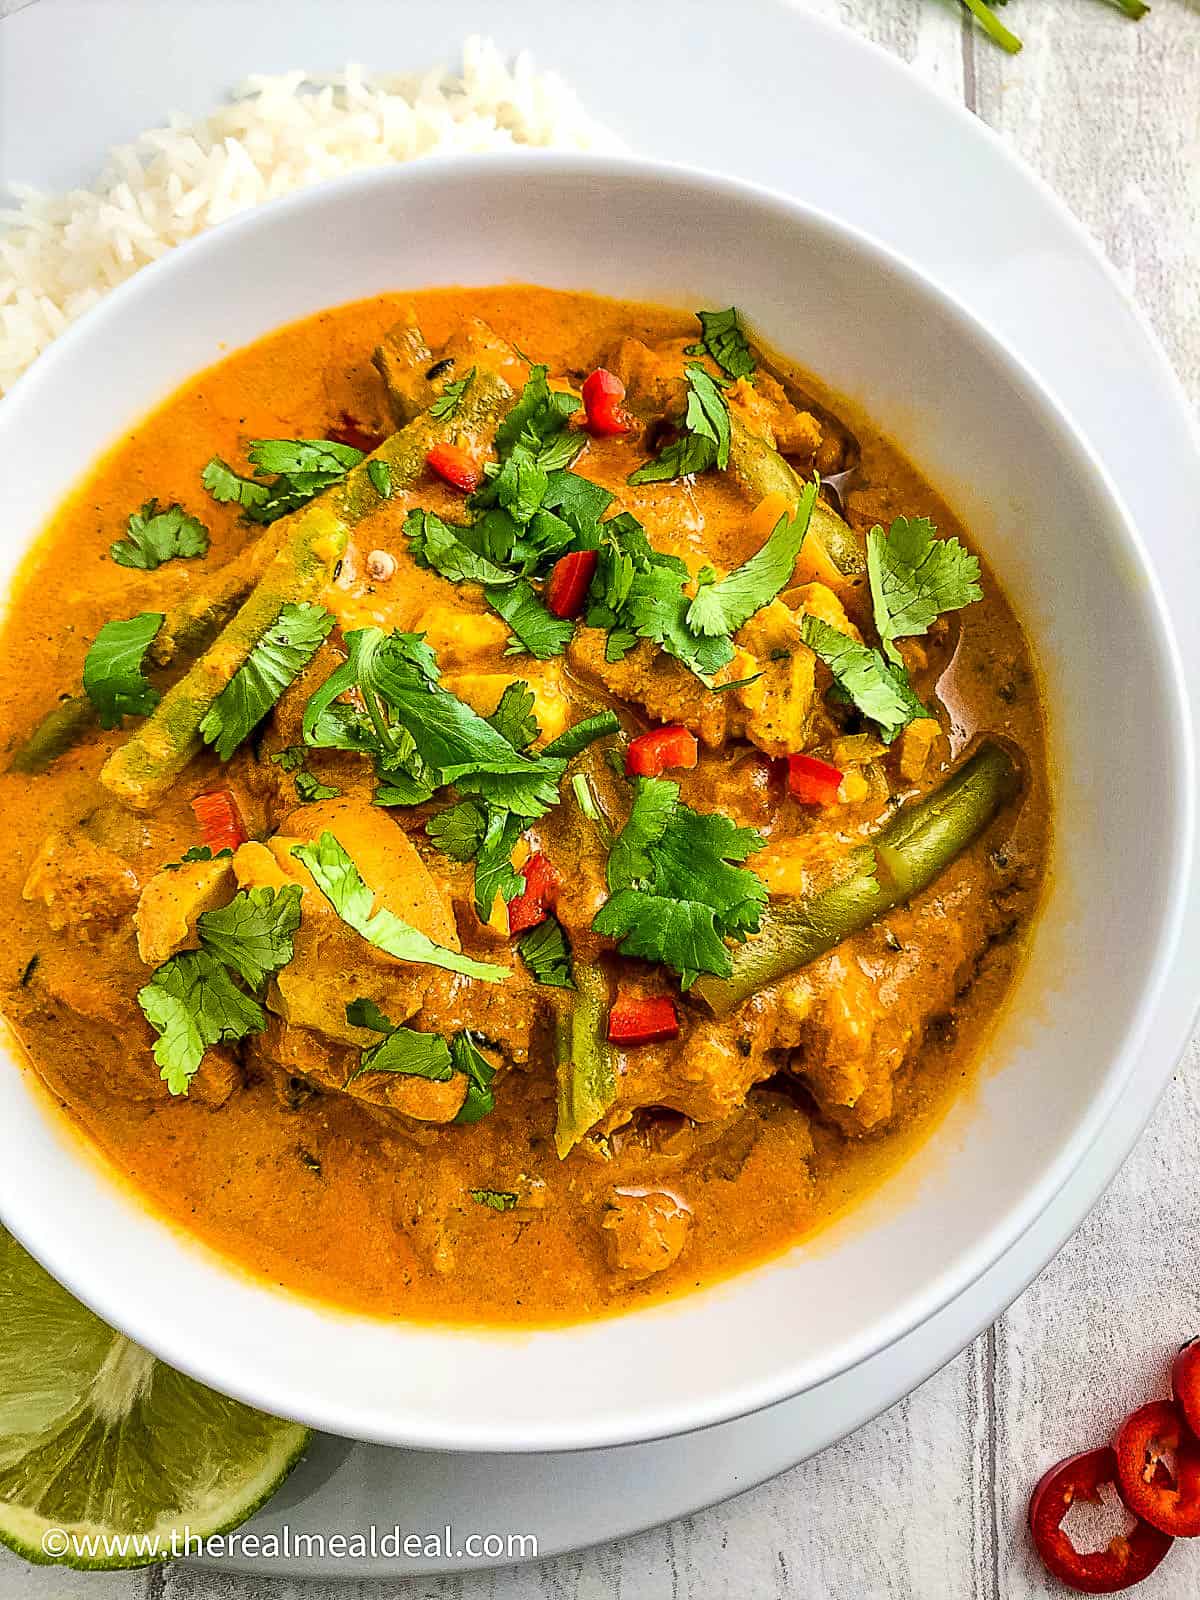 keralan fish curry in a bowl topped with fresh coriander leaves with side of rice